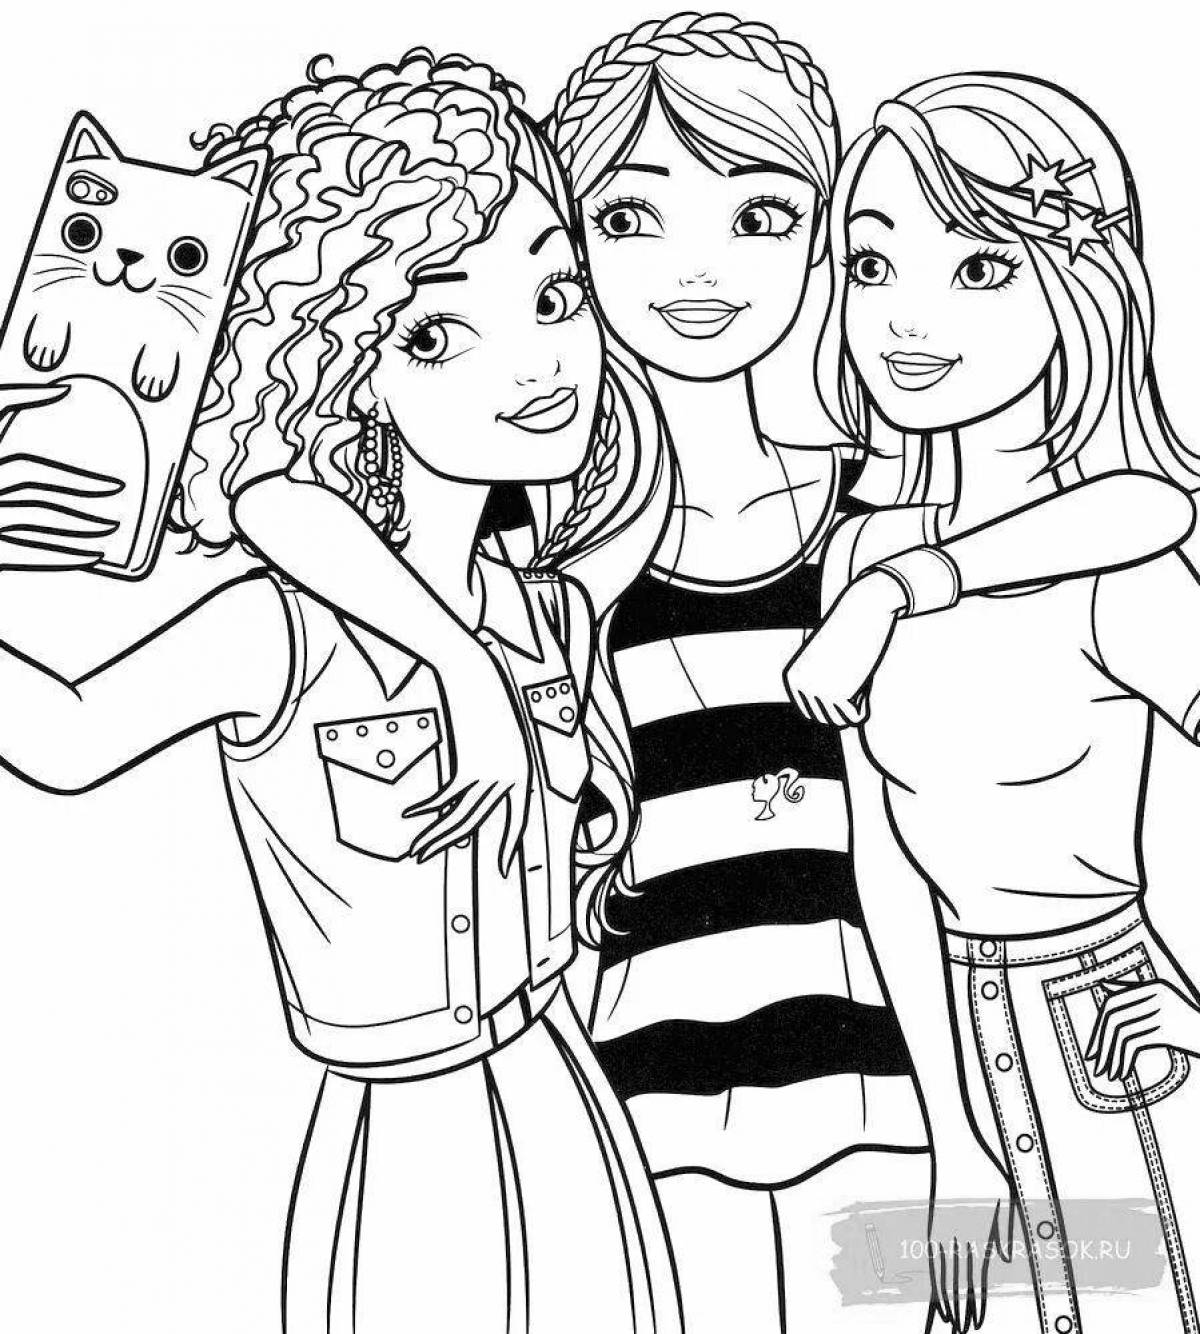 Fun coloring book for 12-13 year olds